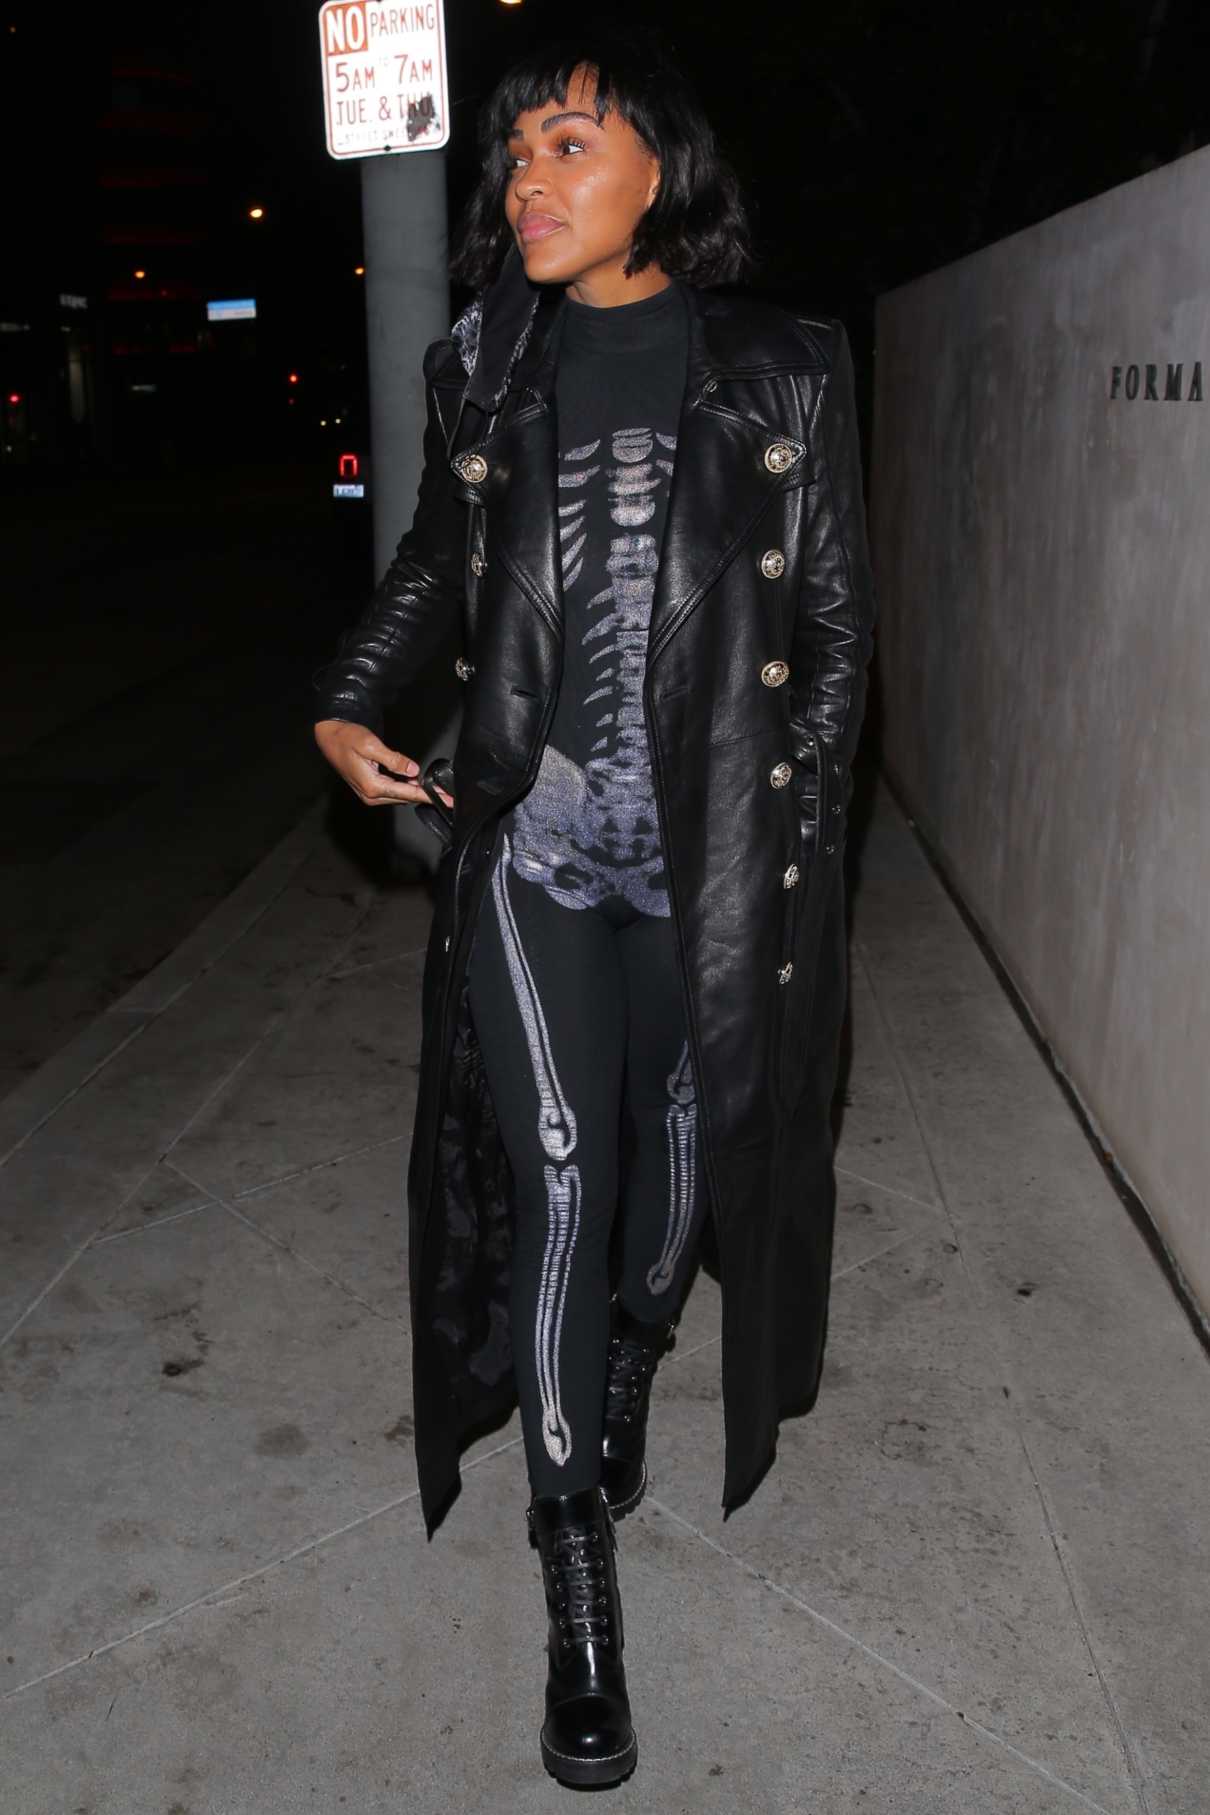 Meagan Good in a Black Leather Coat